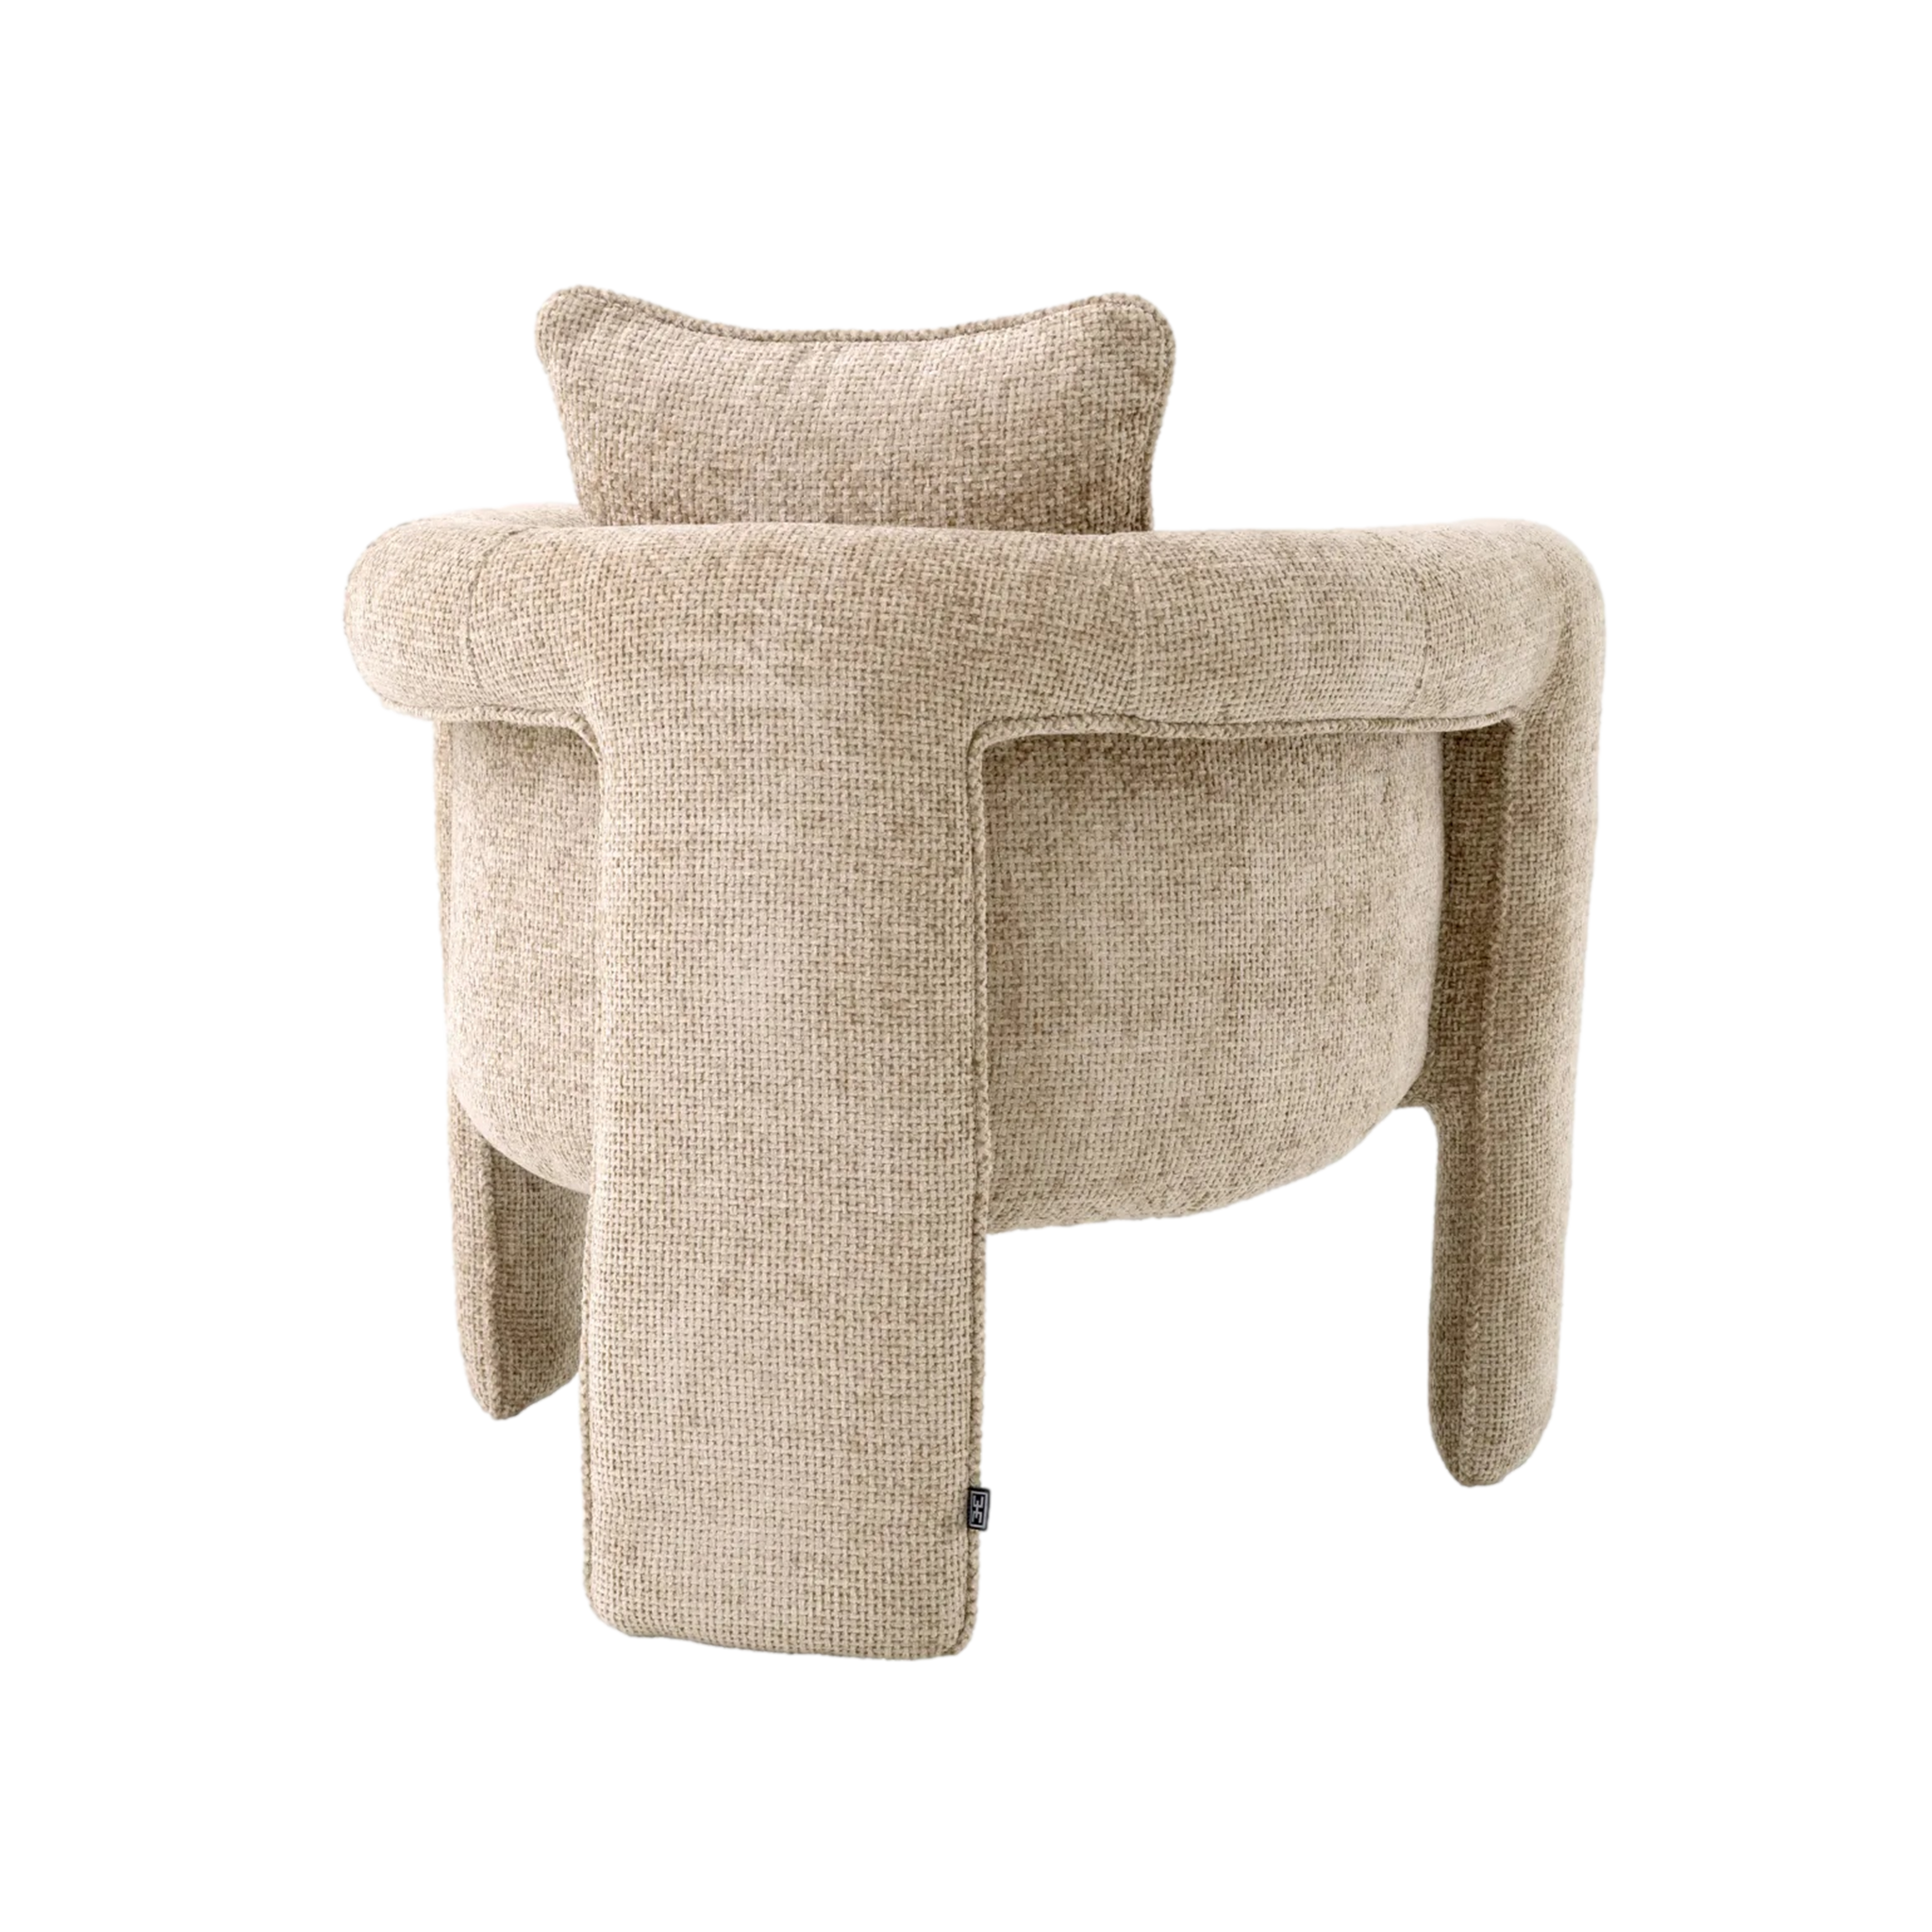 Toto Chair in Sand